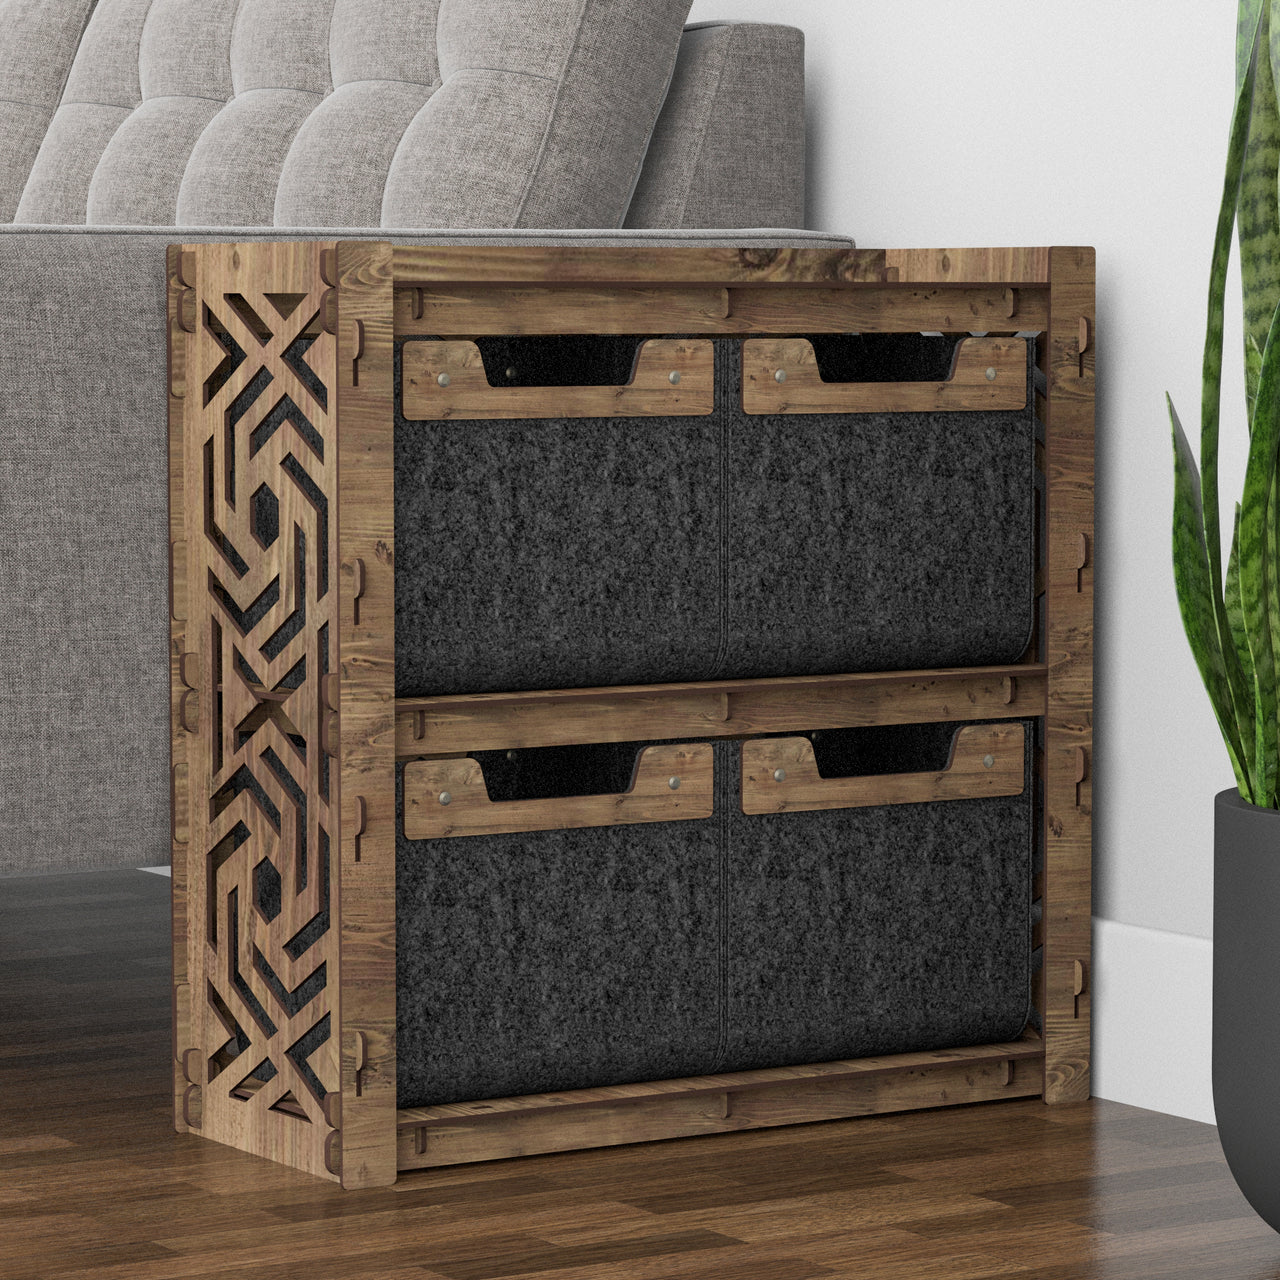 Solar Side Table, End Table 4 Drawers [4 SMALL BLACK BINS]